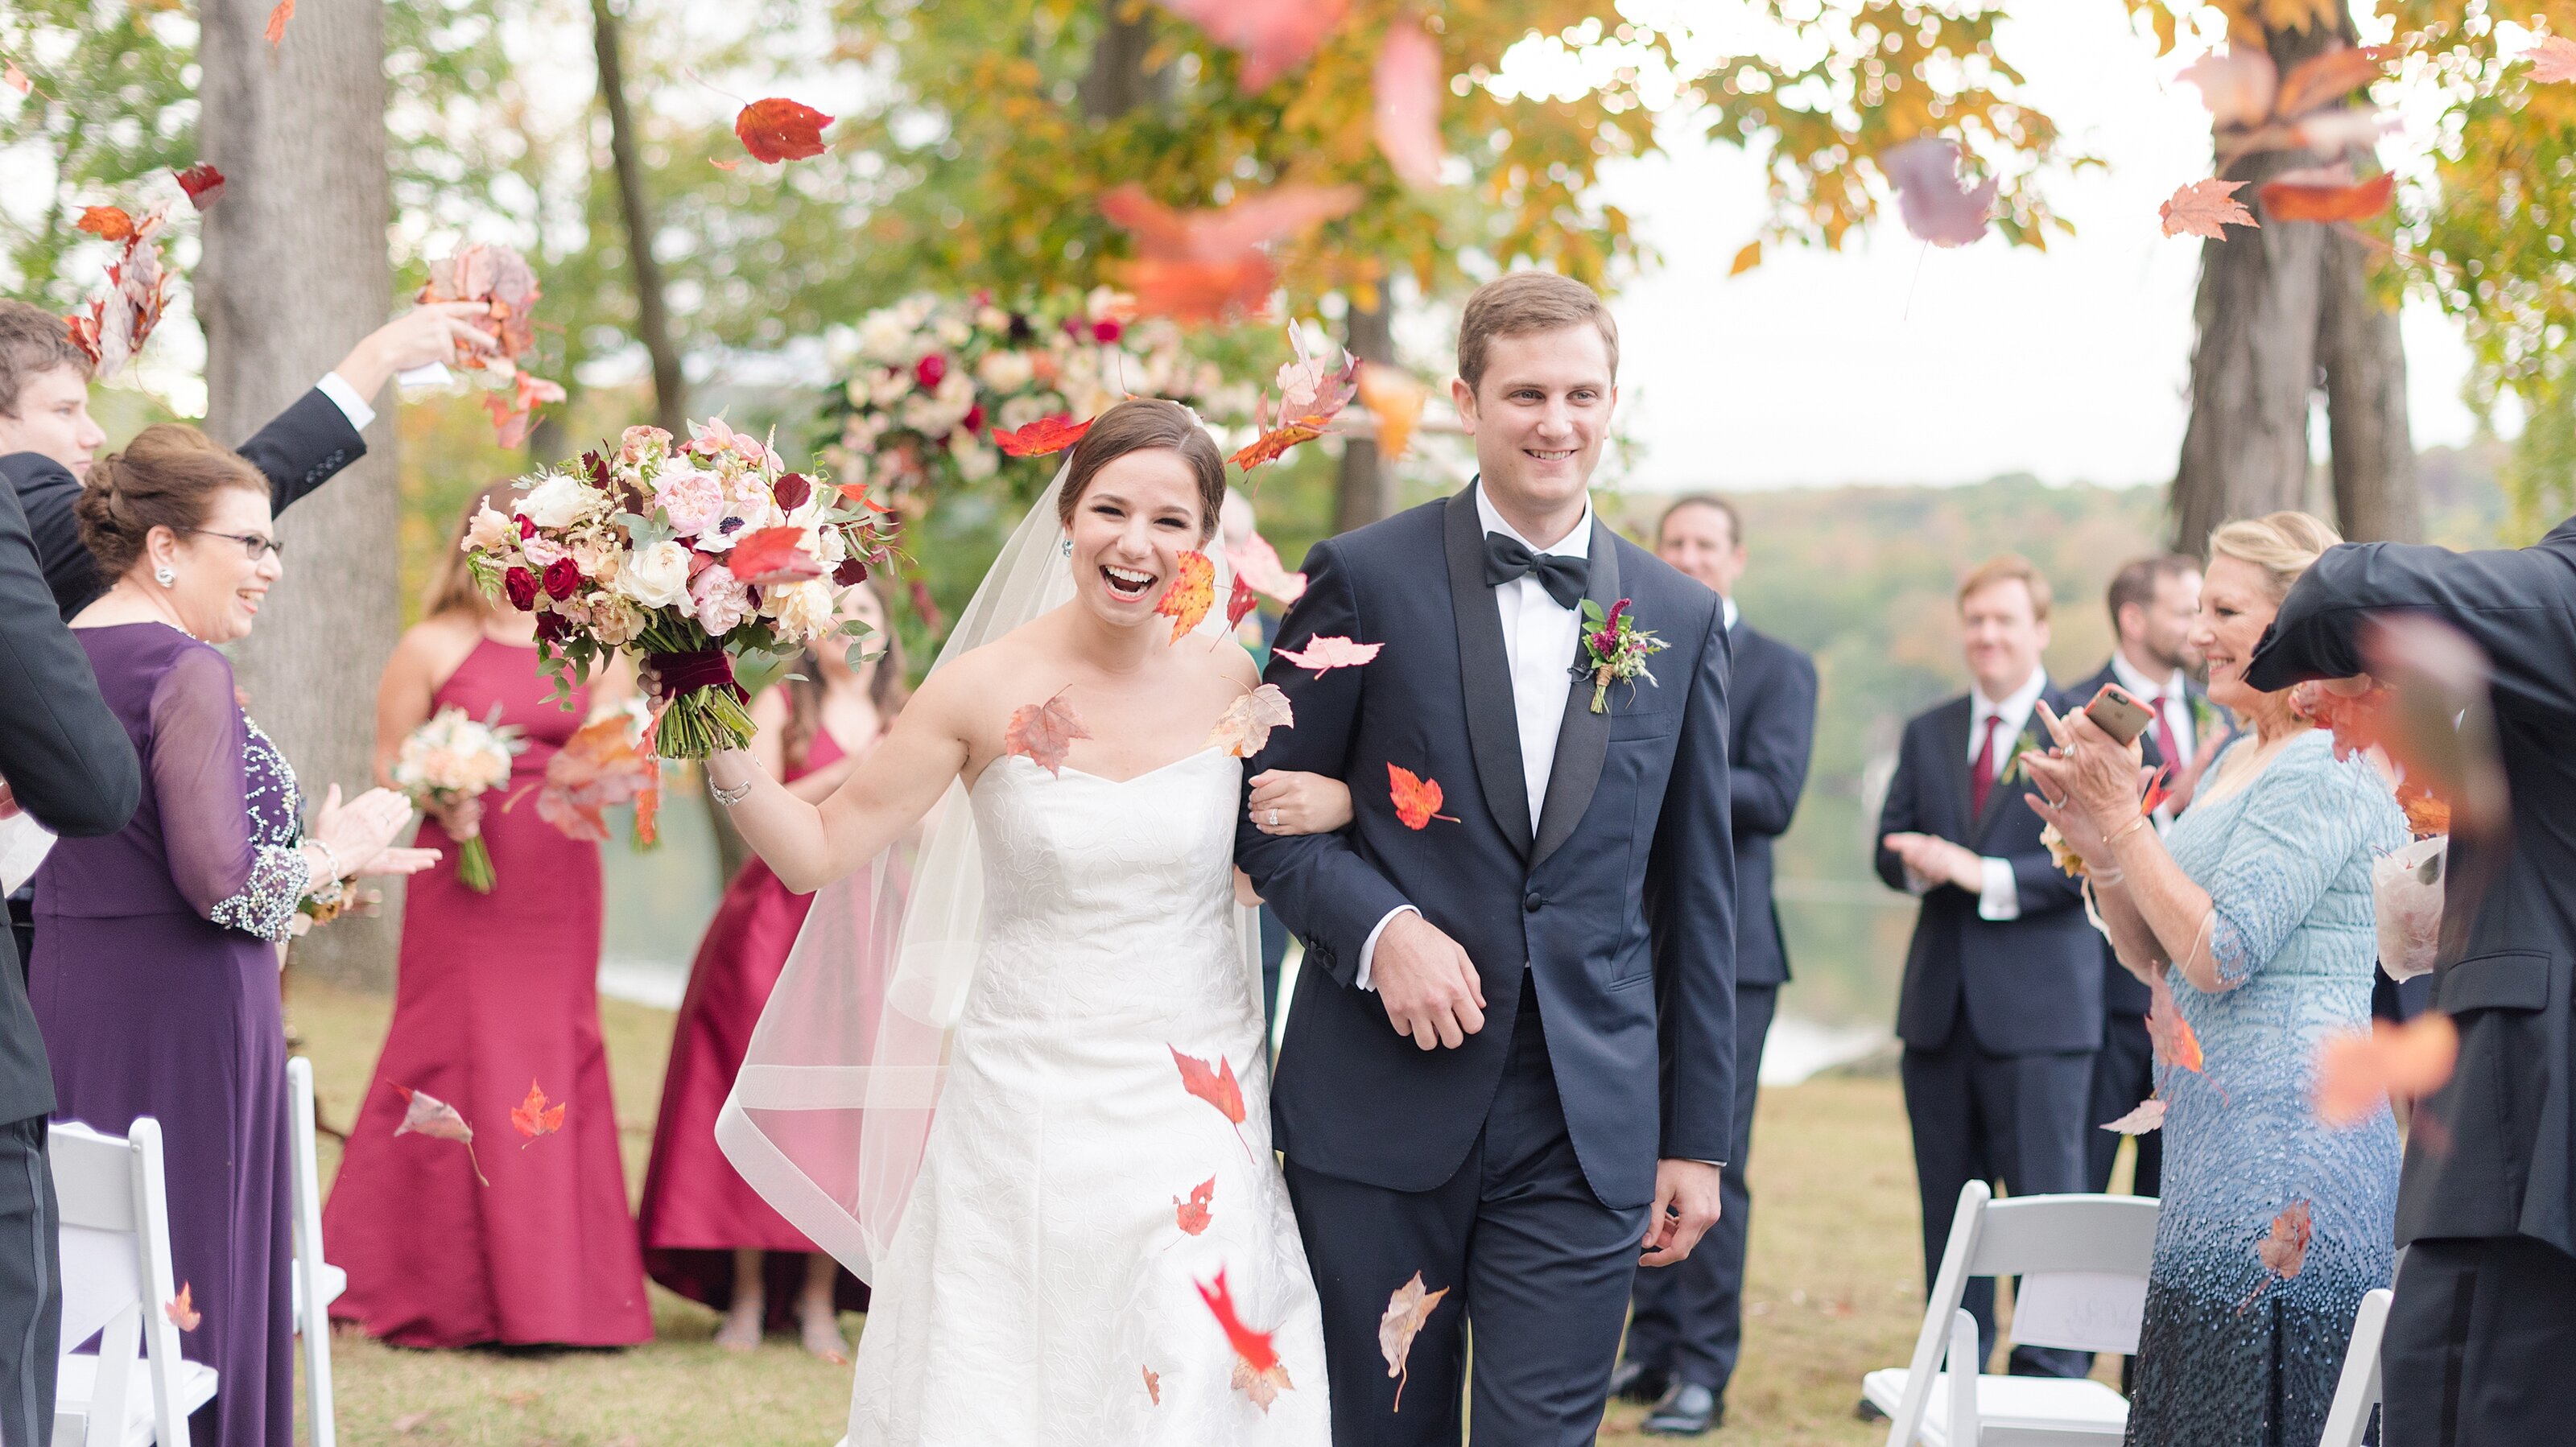 9_Leaves-are-thrown-as-the-bride-and-groom-exit-a fall-ceremony